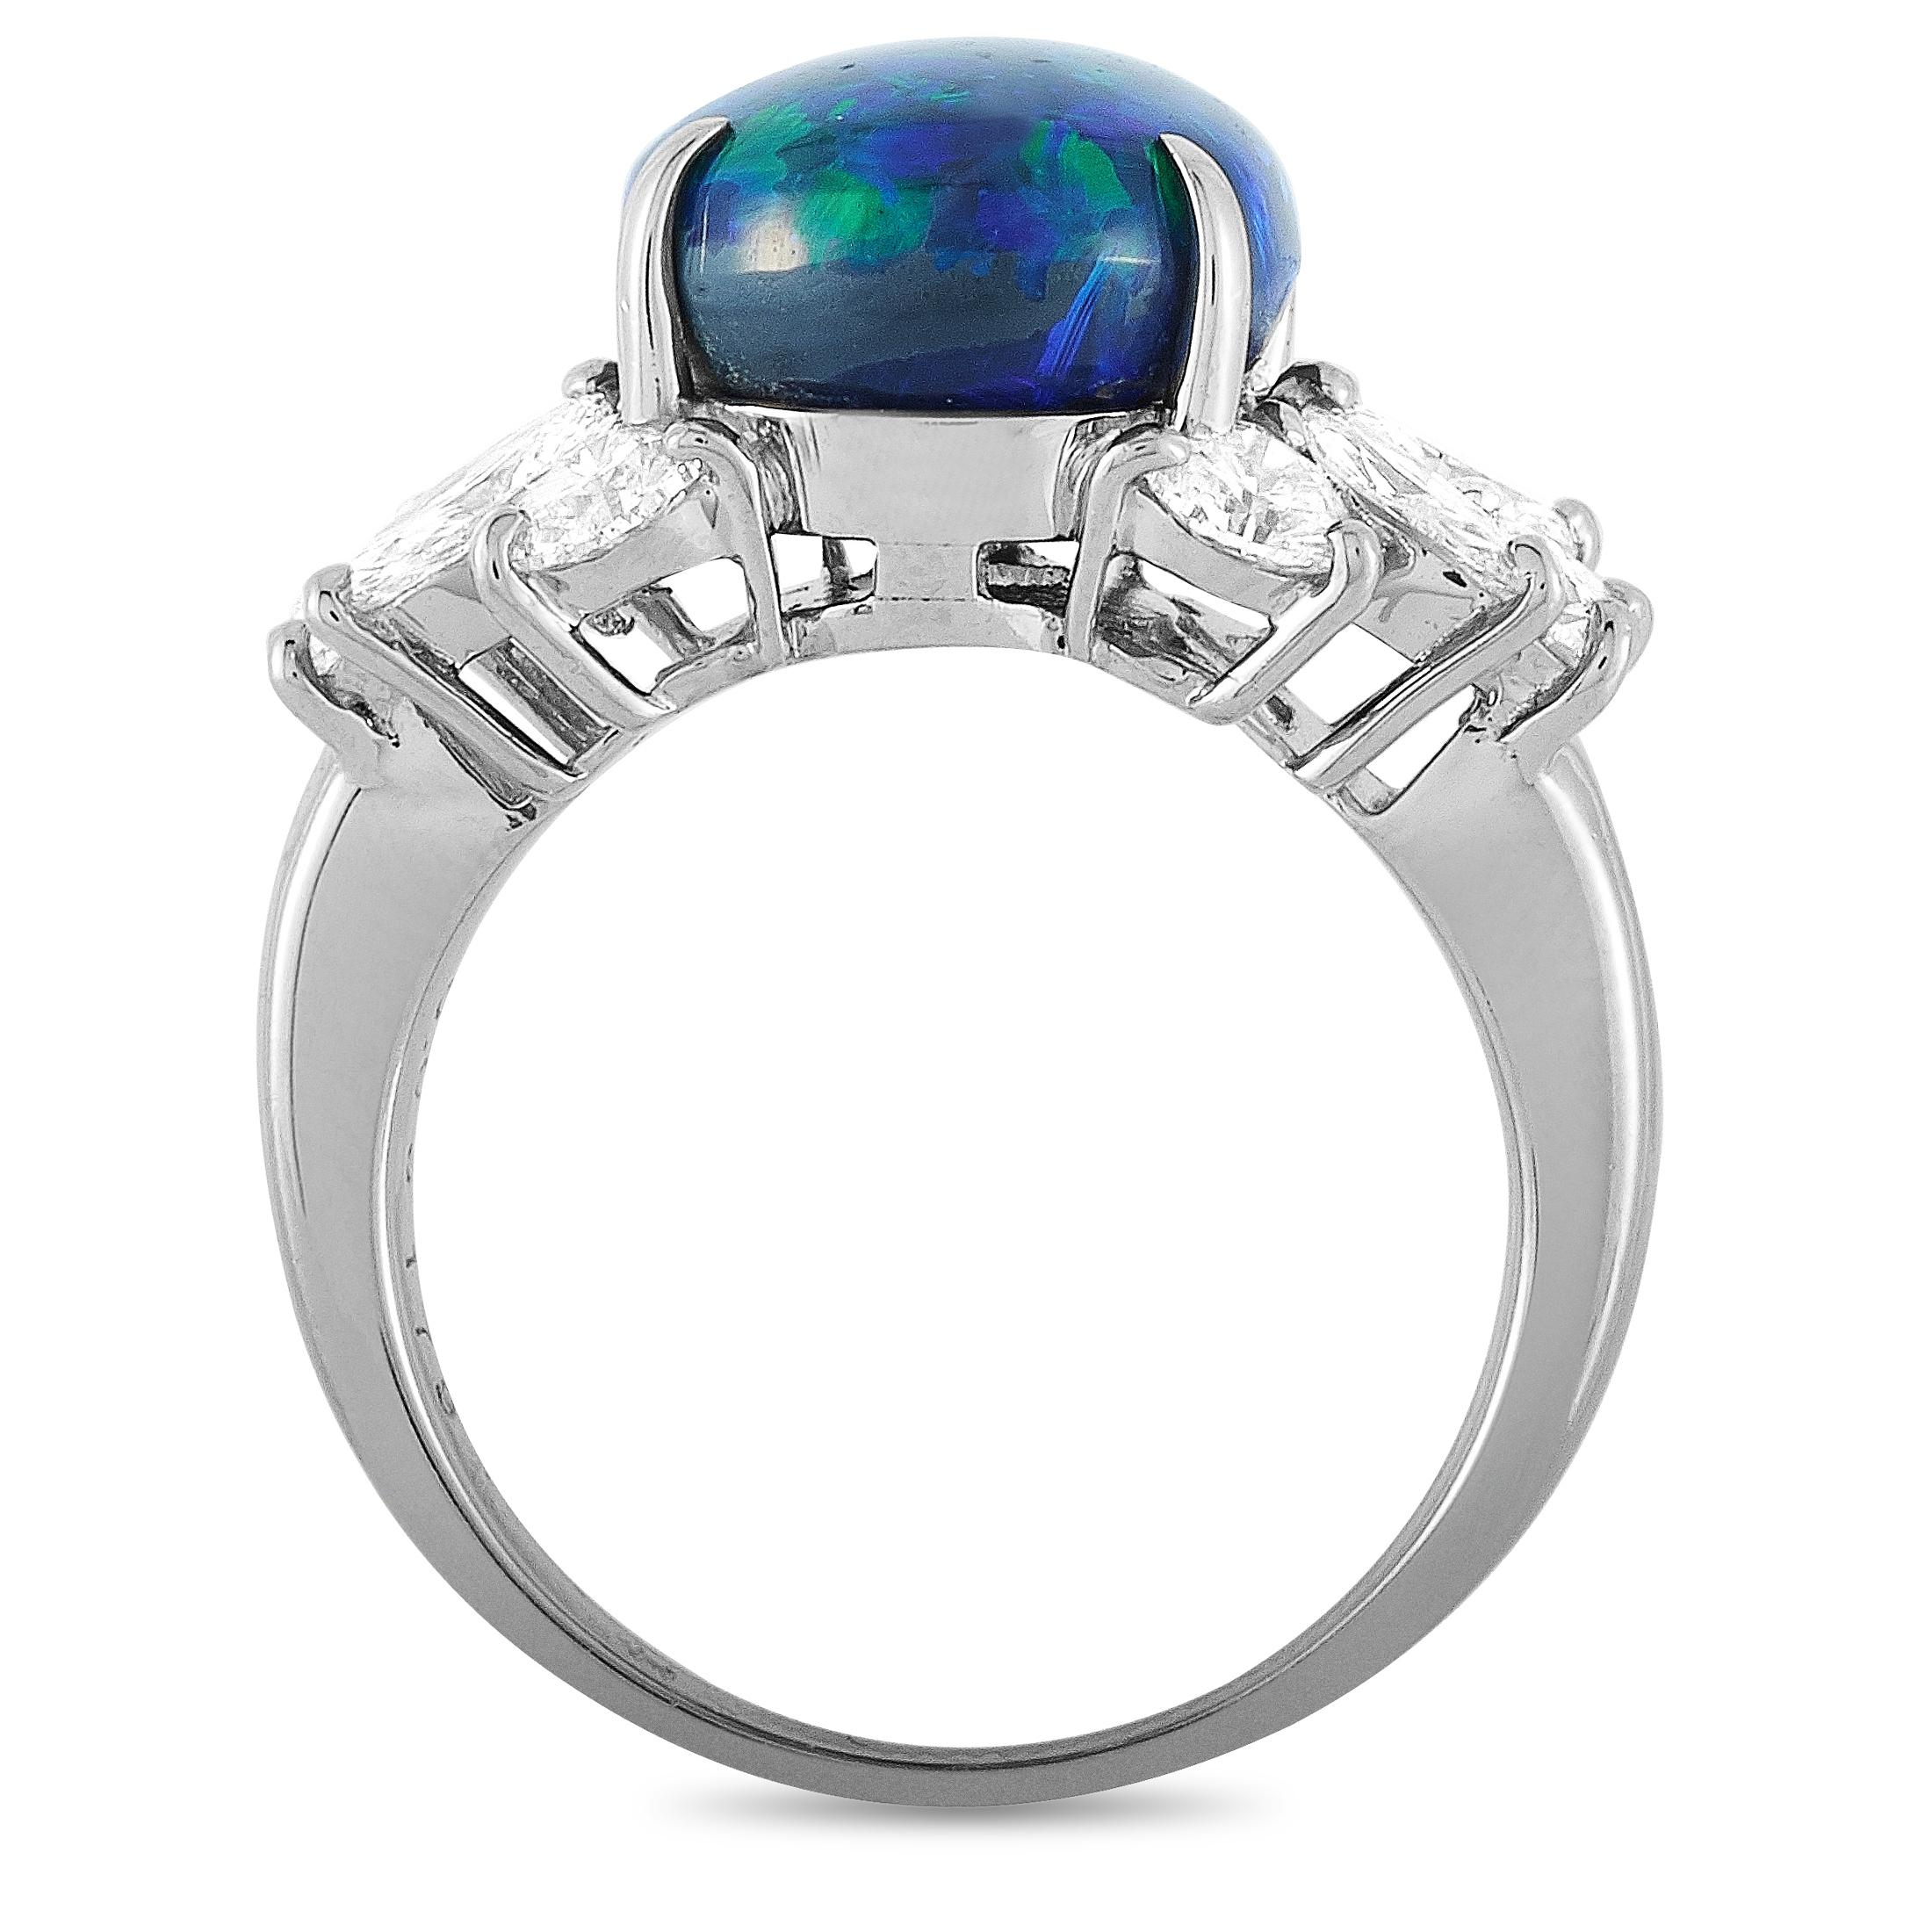 This LB Exclusive ring is crafted from platinum and weighs 10.7 grams. It boasts band thickness of 2 mm and top height of 9 mm, while top dimensions measure 22 by 13 mm. The ring is set with a black opal that weighs 6.05 carats and with diamonds